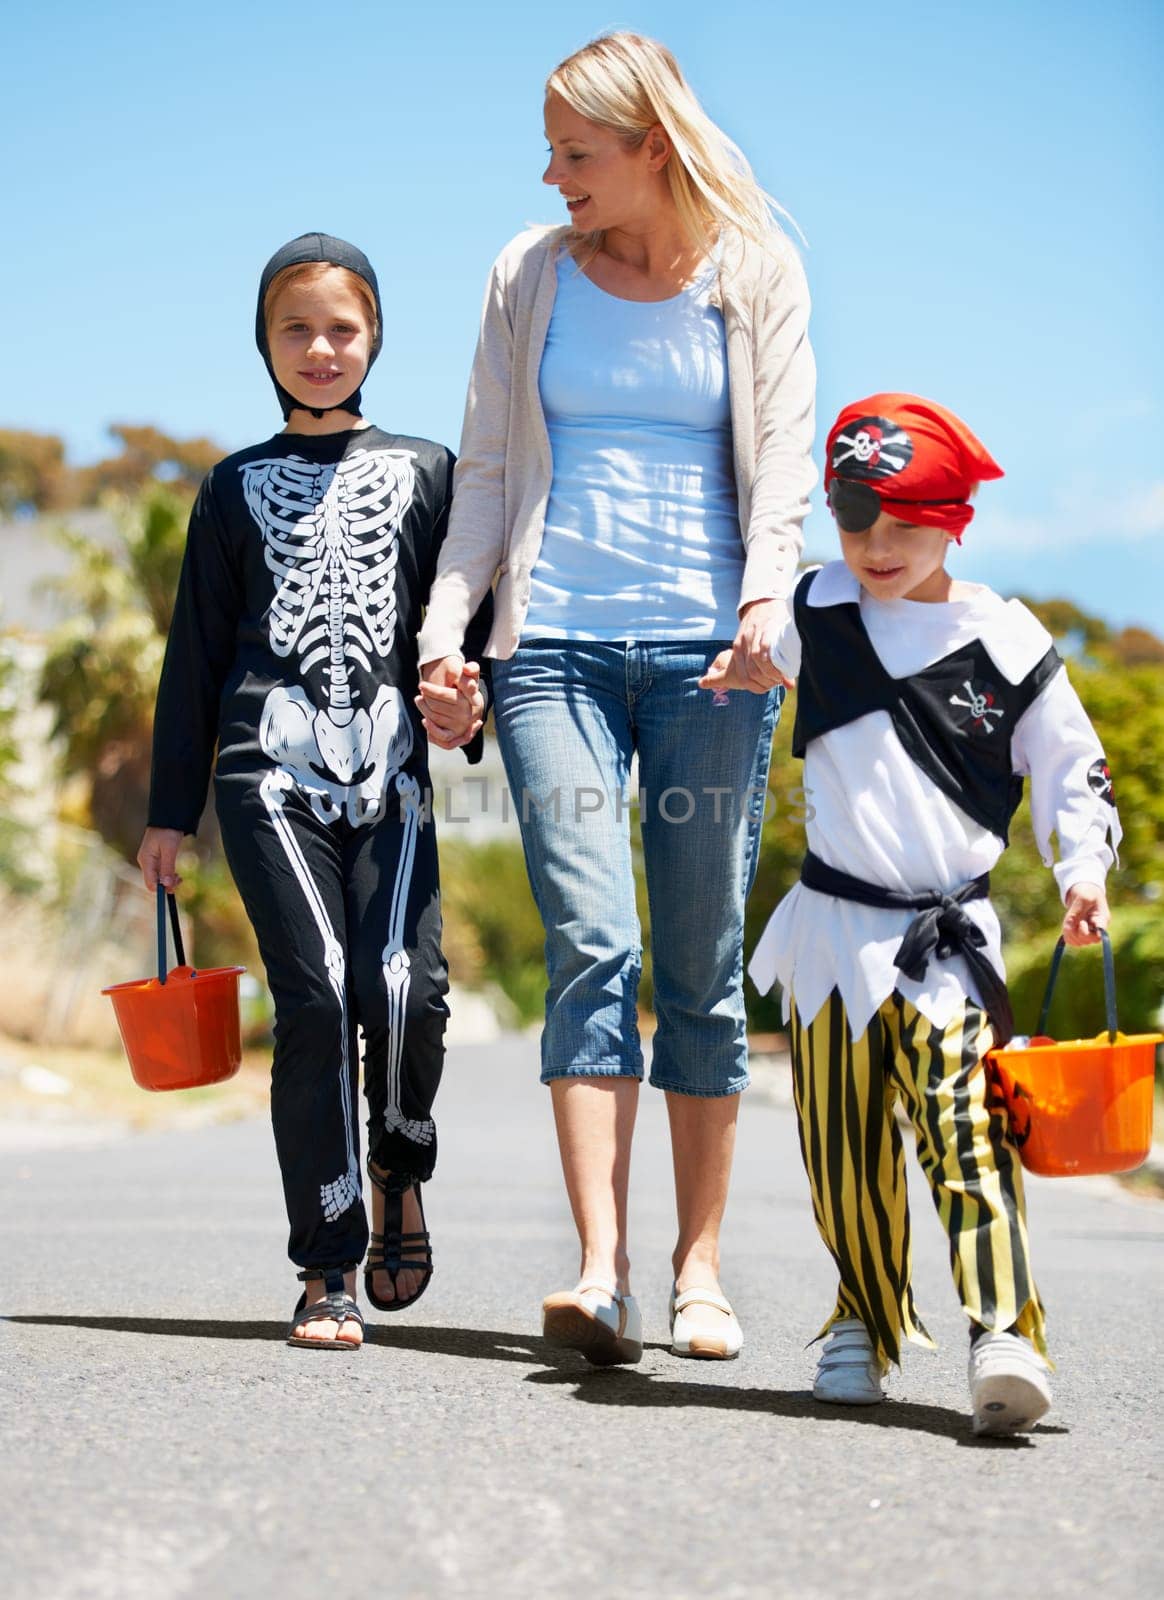 Going trick or treating. Children in costume going treat or treating with their mom. by YuriArcurs